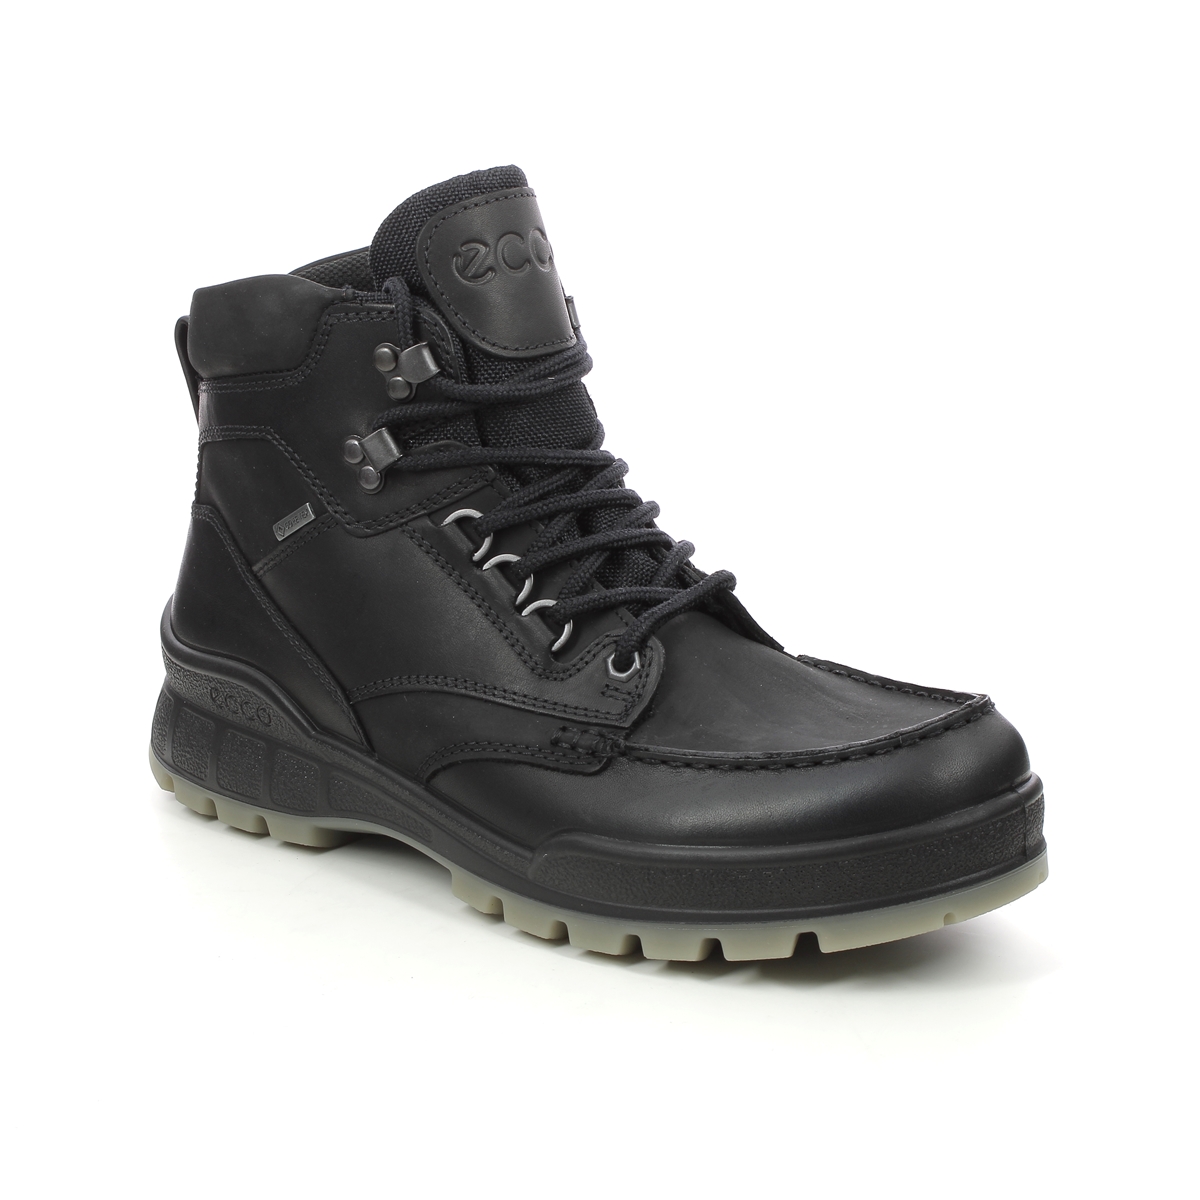 Ecco Track 25 Boot Gtx Black Leather Mens Outdoor Walking Boots 831704-51052 In Size 42 In Plain Black Leather